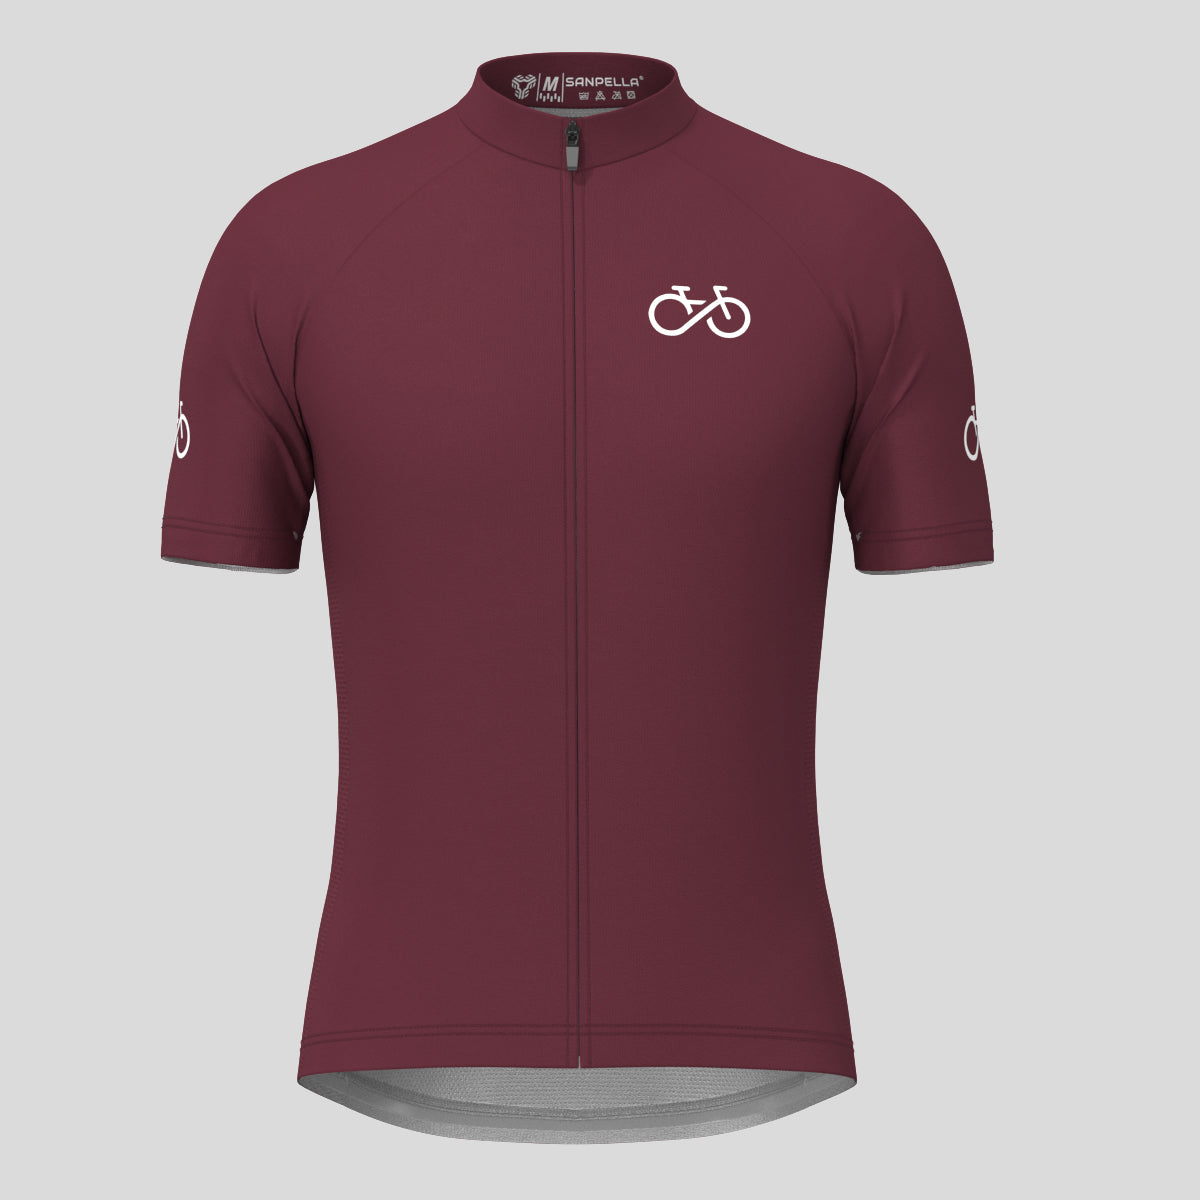 Ride Forever Men's Cycling Jersey -Plum